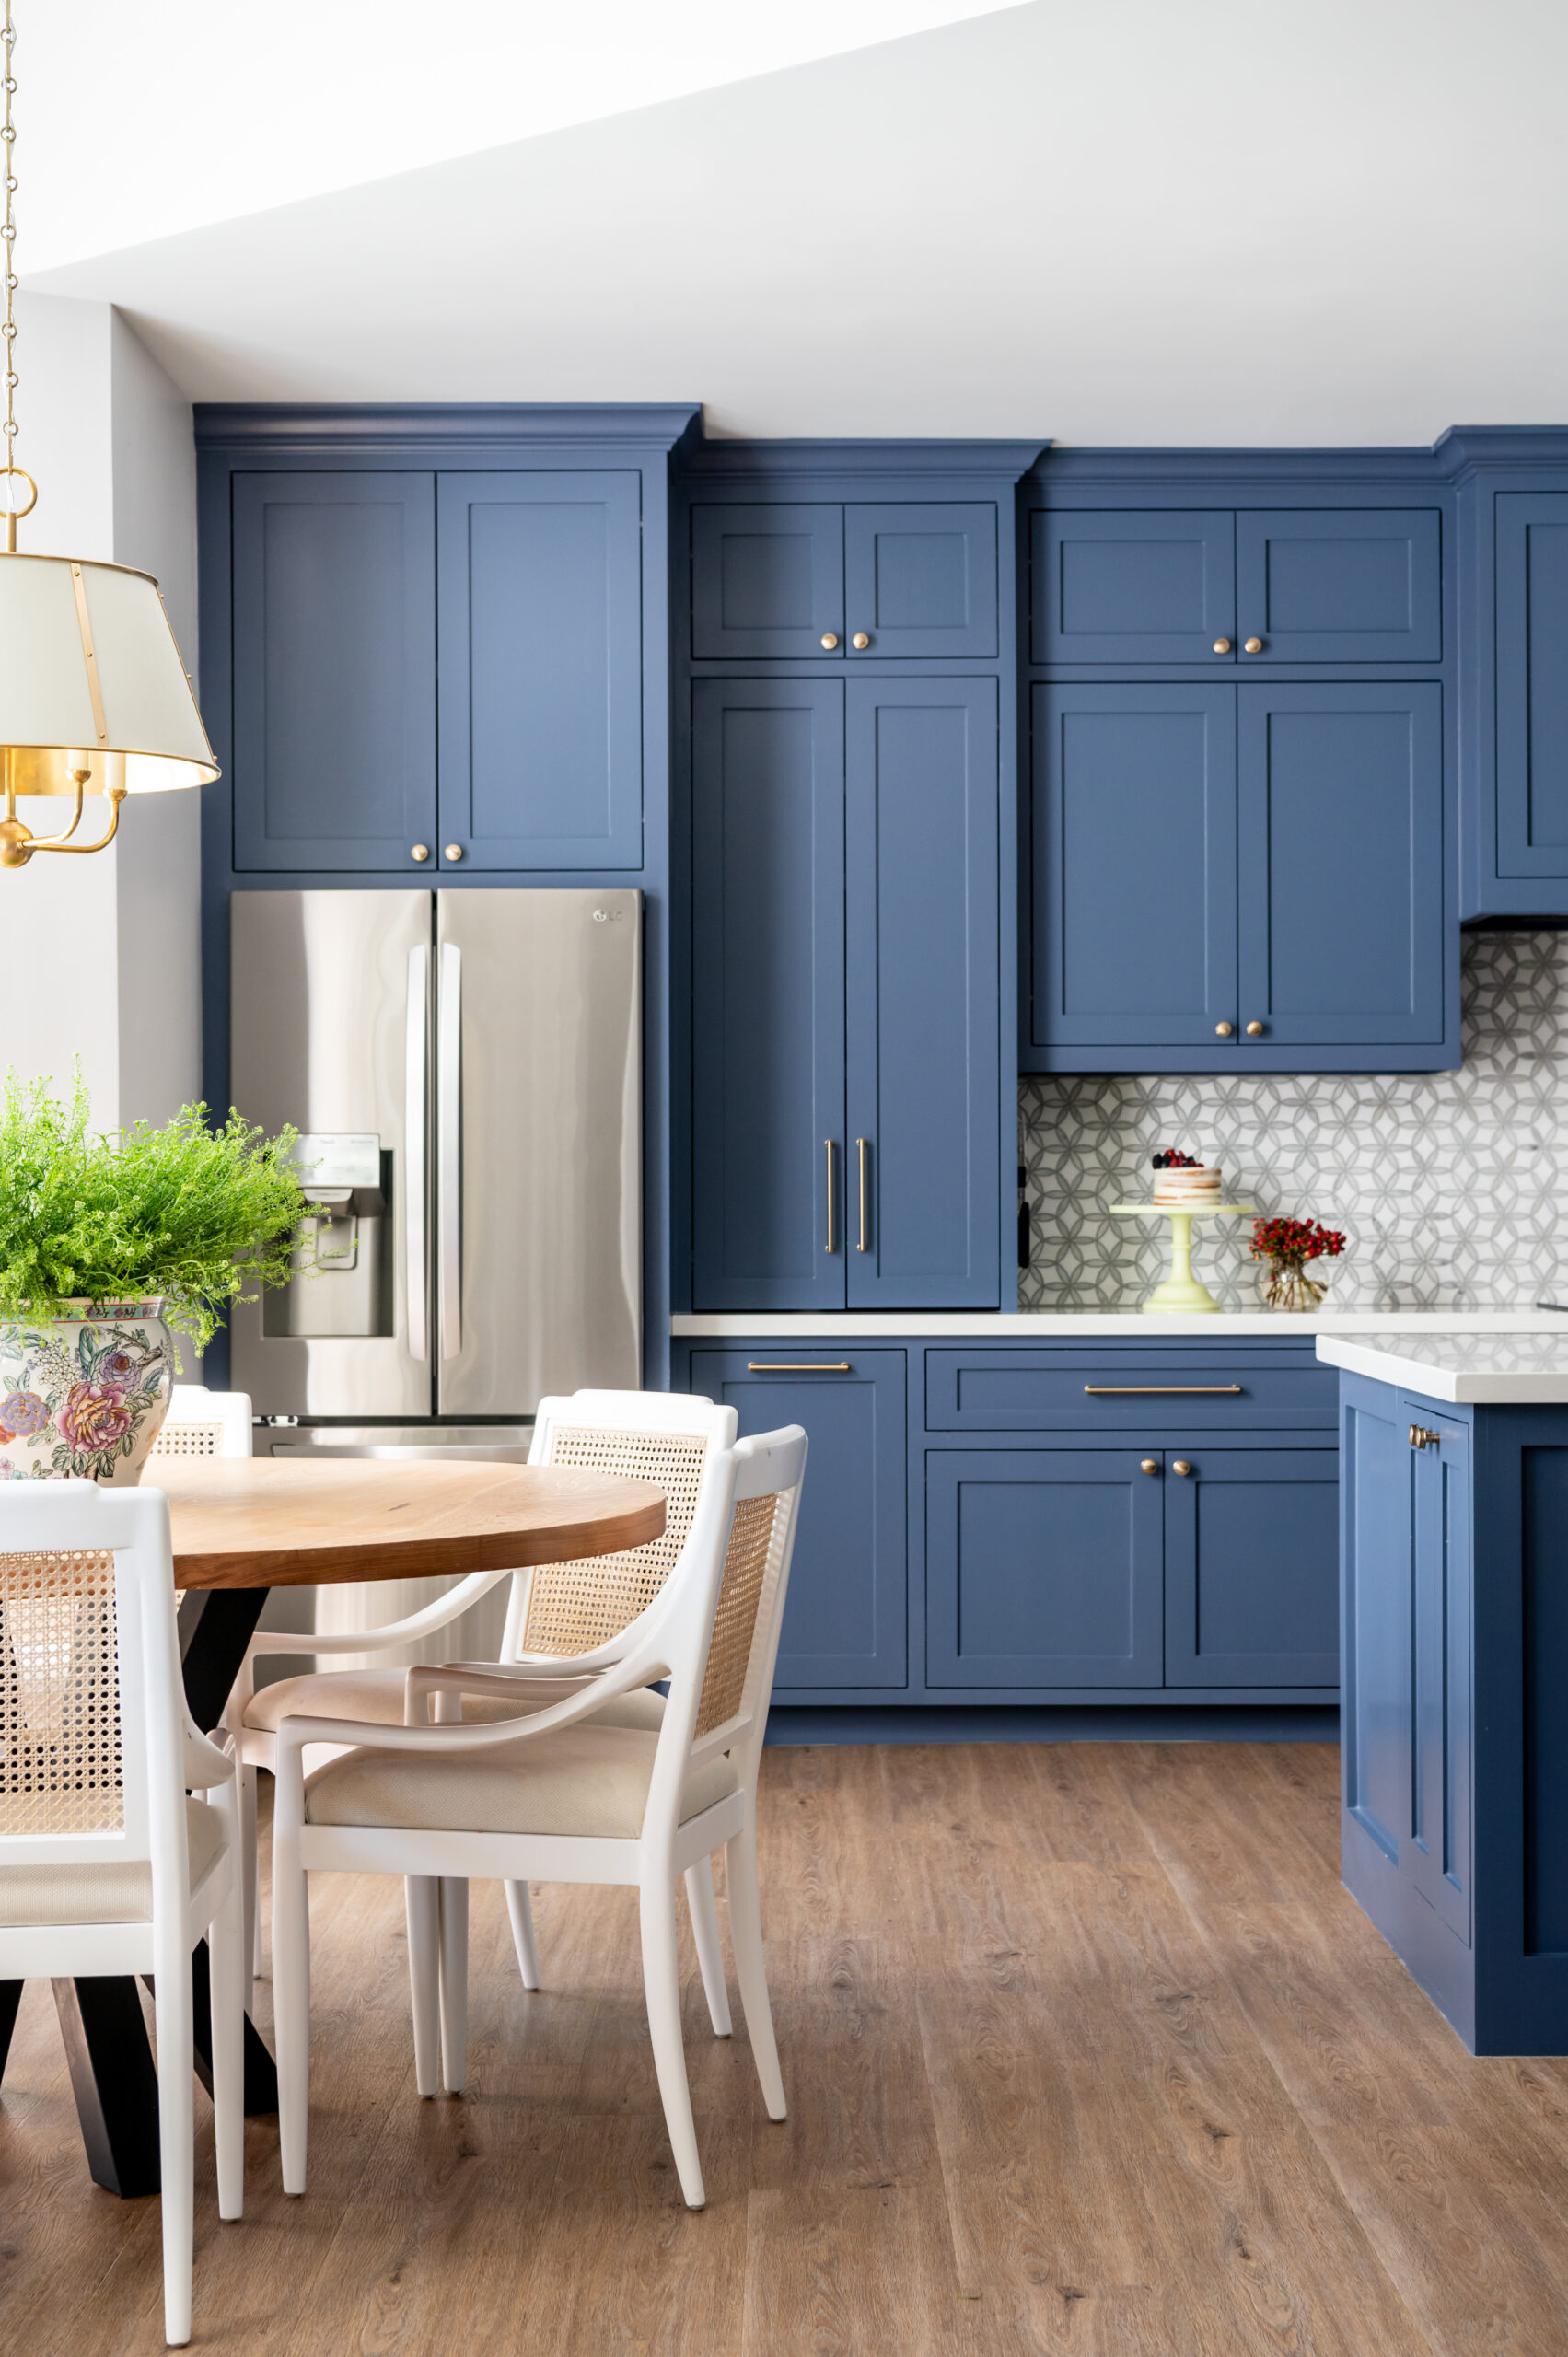 Beautiful bright and blue kitchen interior design for an interior photography shoot